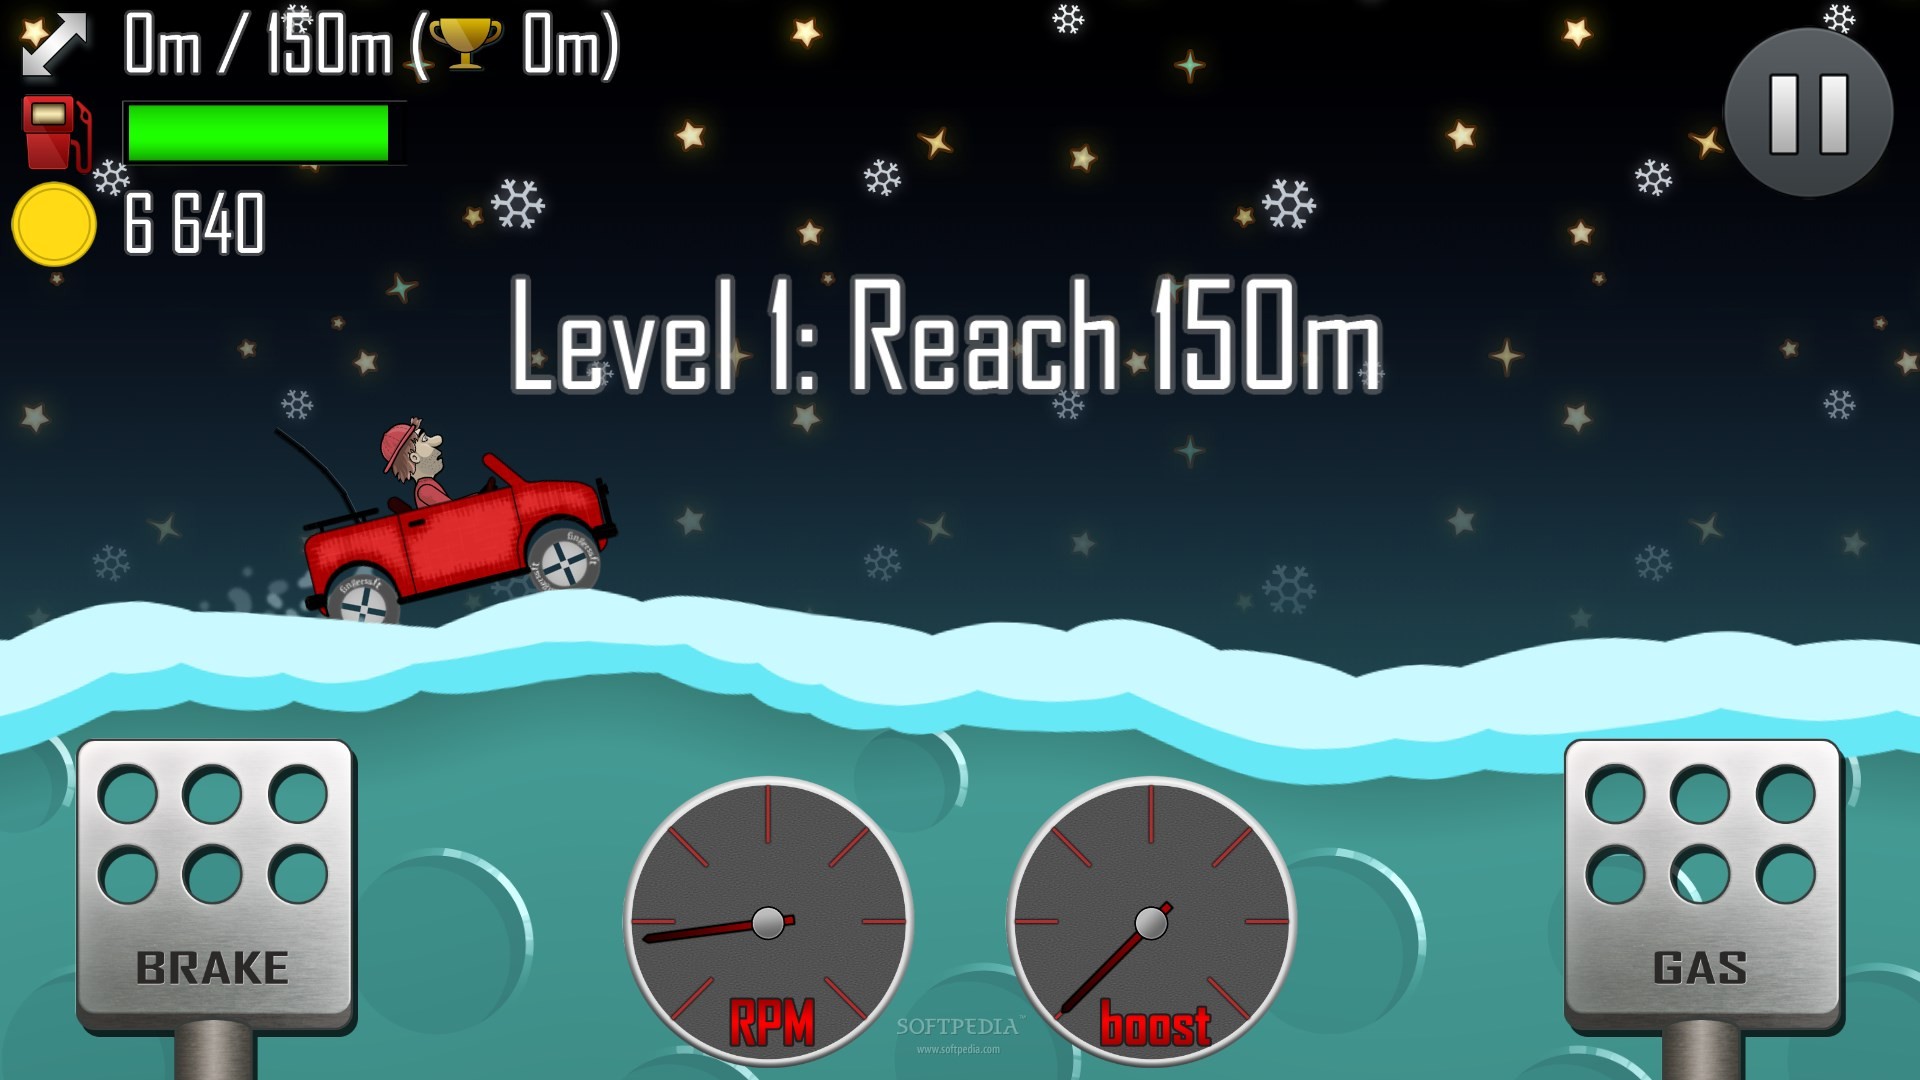 hill climb racing for windows 8.1 download